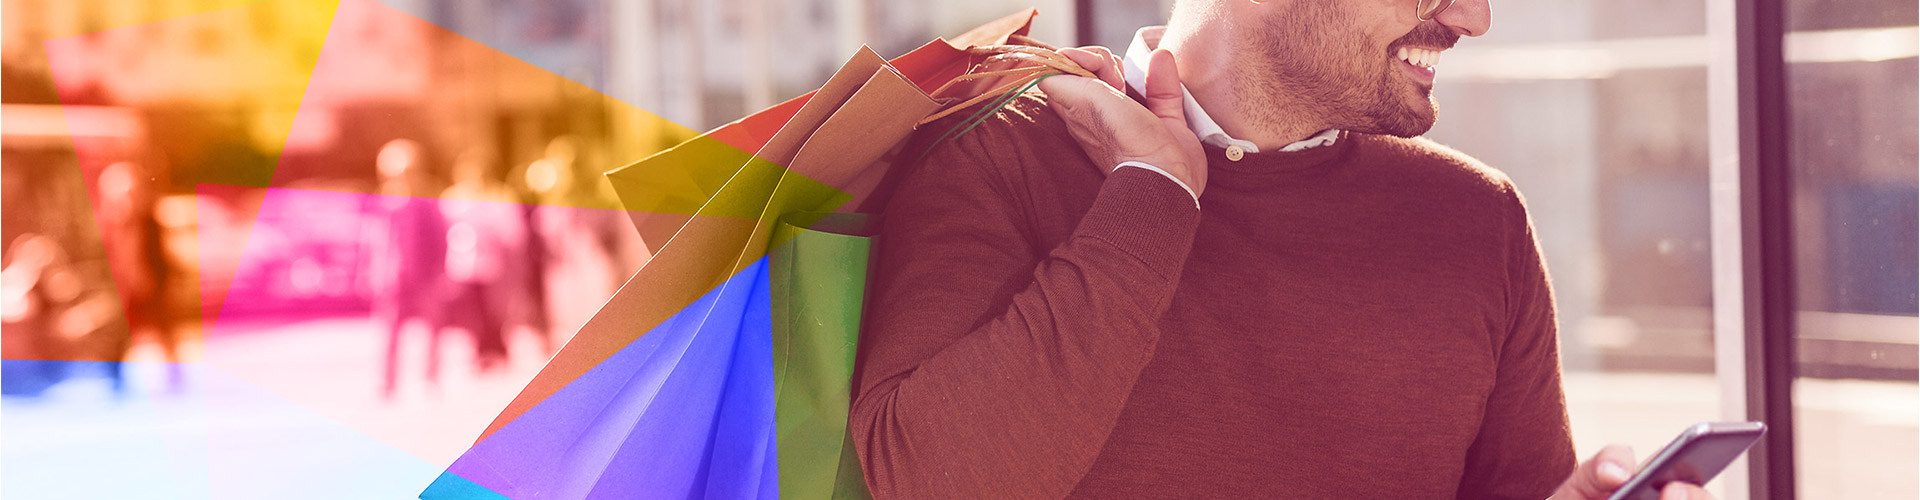 Blog banner featuring smiling man holding shopping bags over his shoulder and looking at his phone